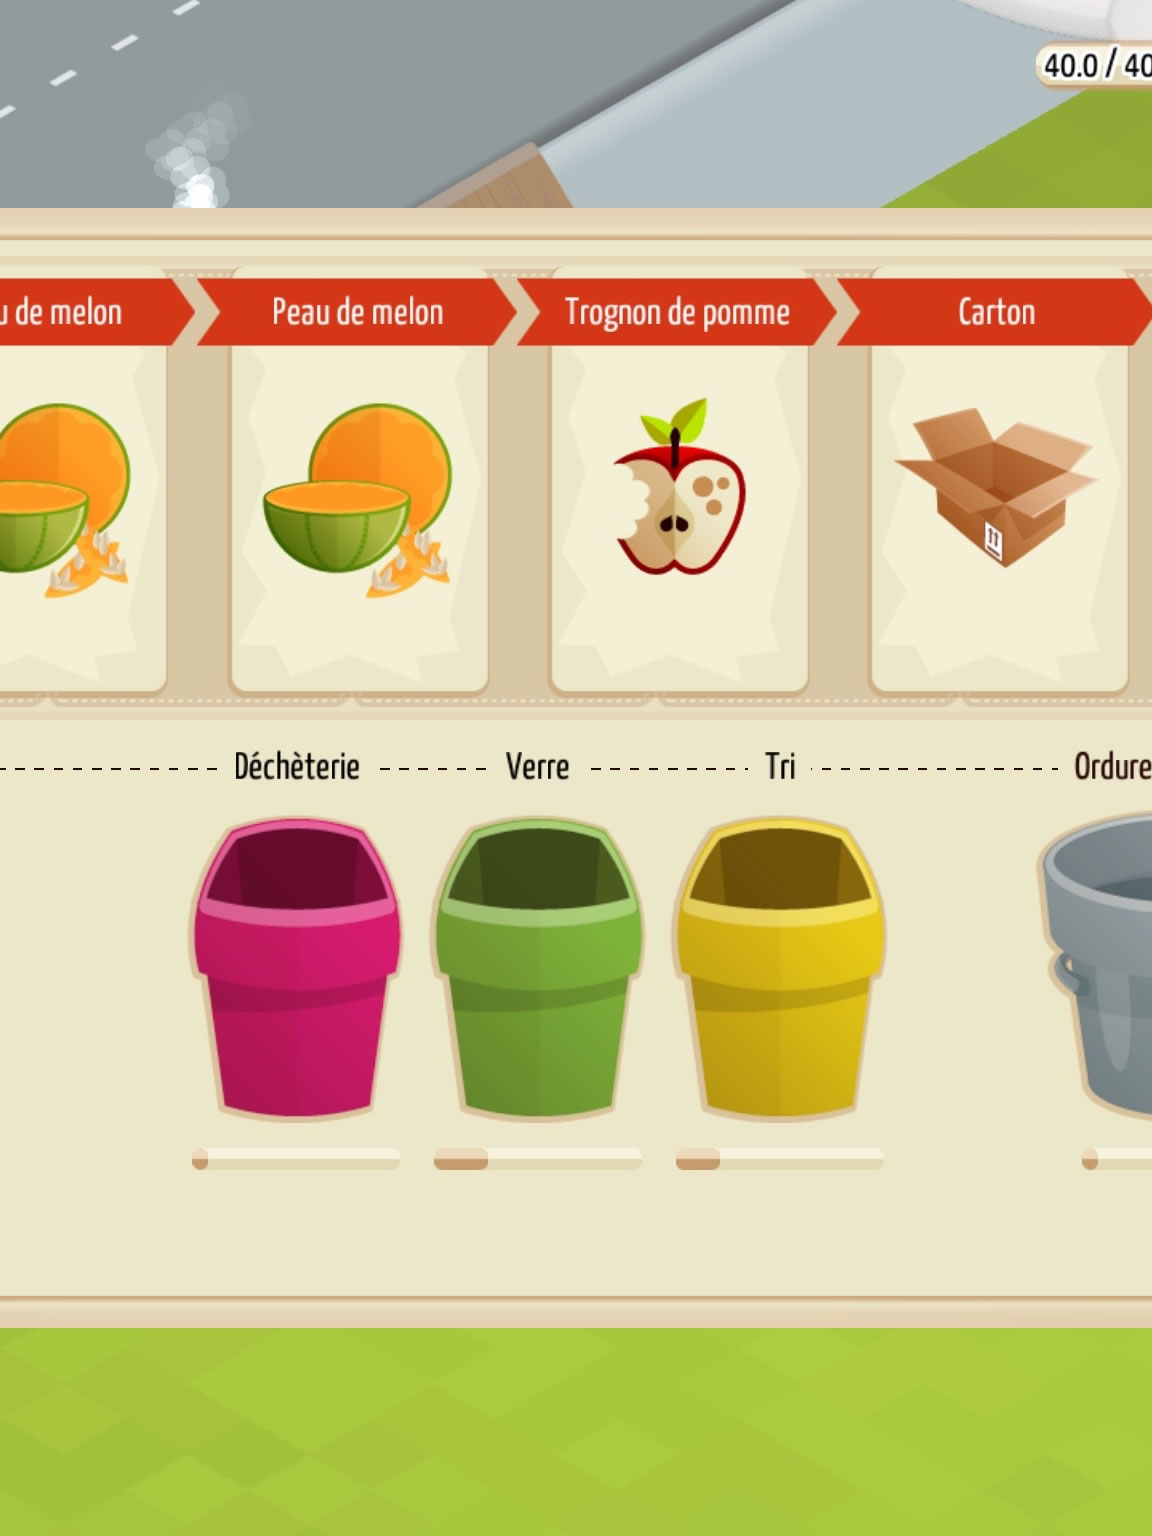 Coming Soon Compost Challenge